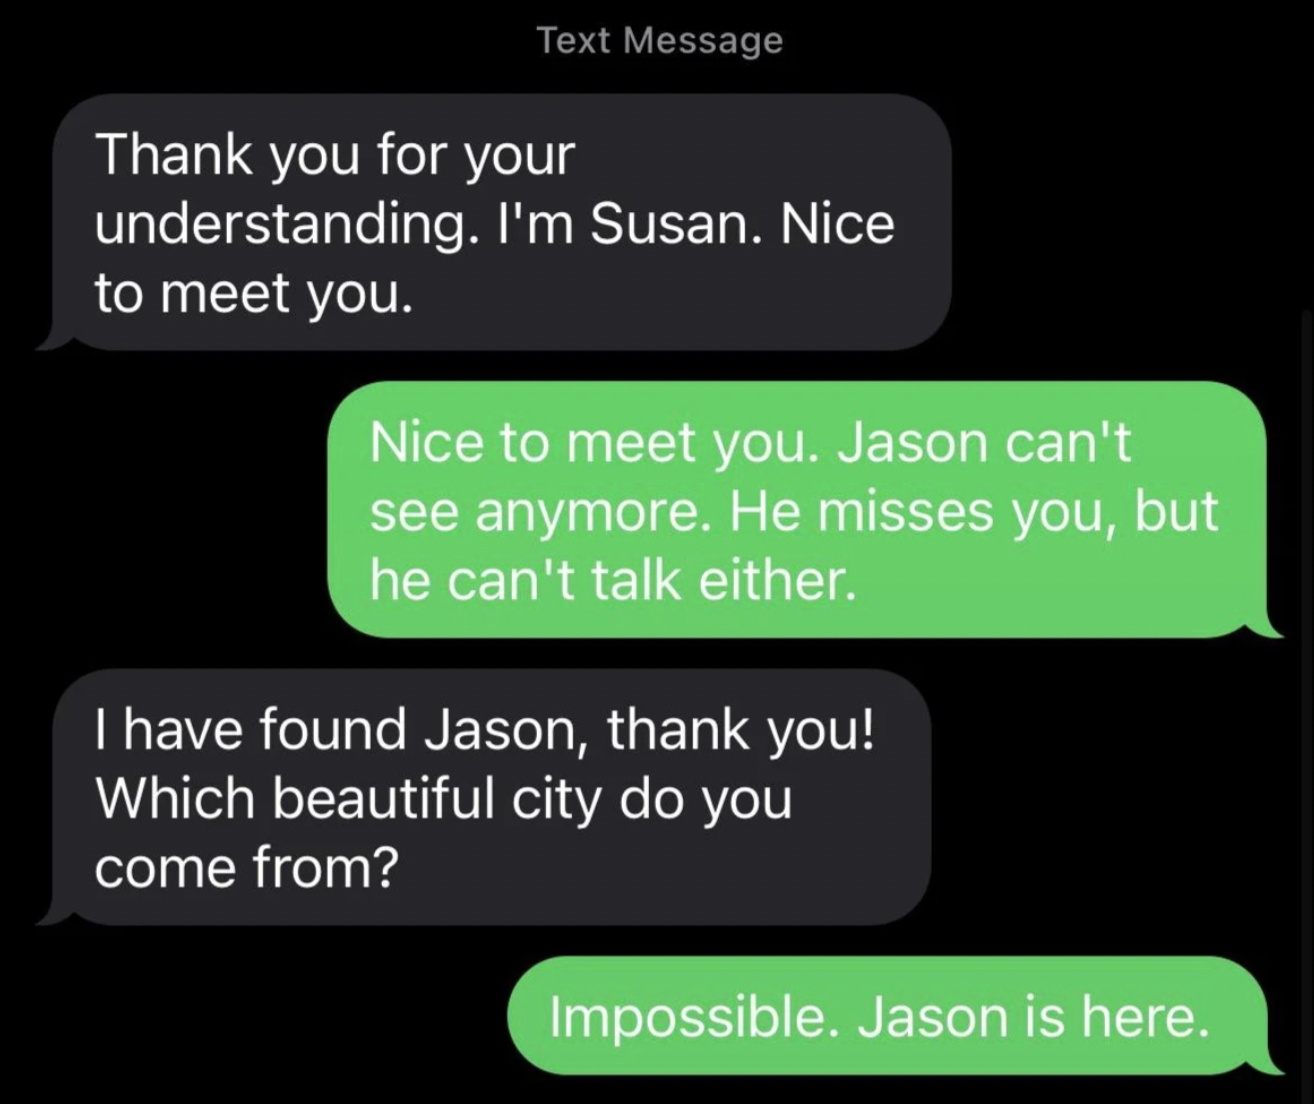 angle - Text Message Thank you for your understanding. I'm Susan. Nice to meet you. Nice to meet you. Jason can't see anymore. He misses you, but he can't talk either. I have found Jason, thank you! Which beautiful city do you come from? Impossible. Jason